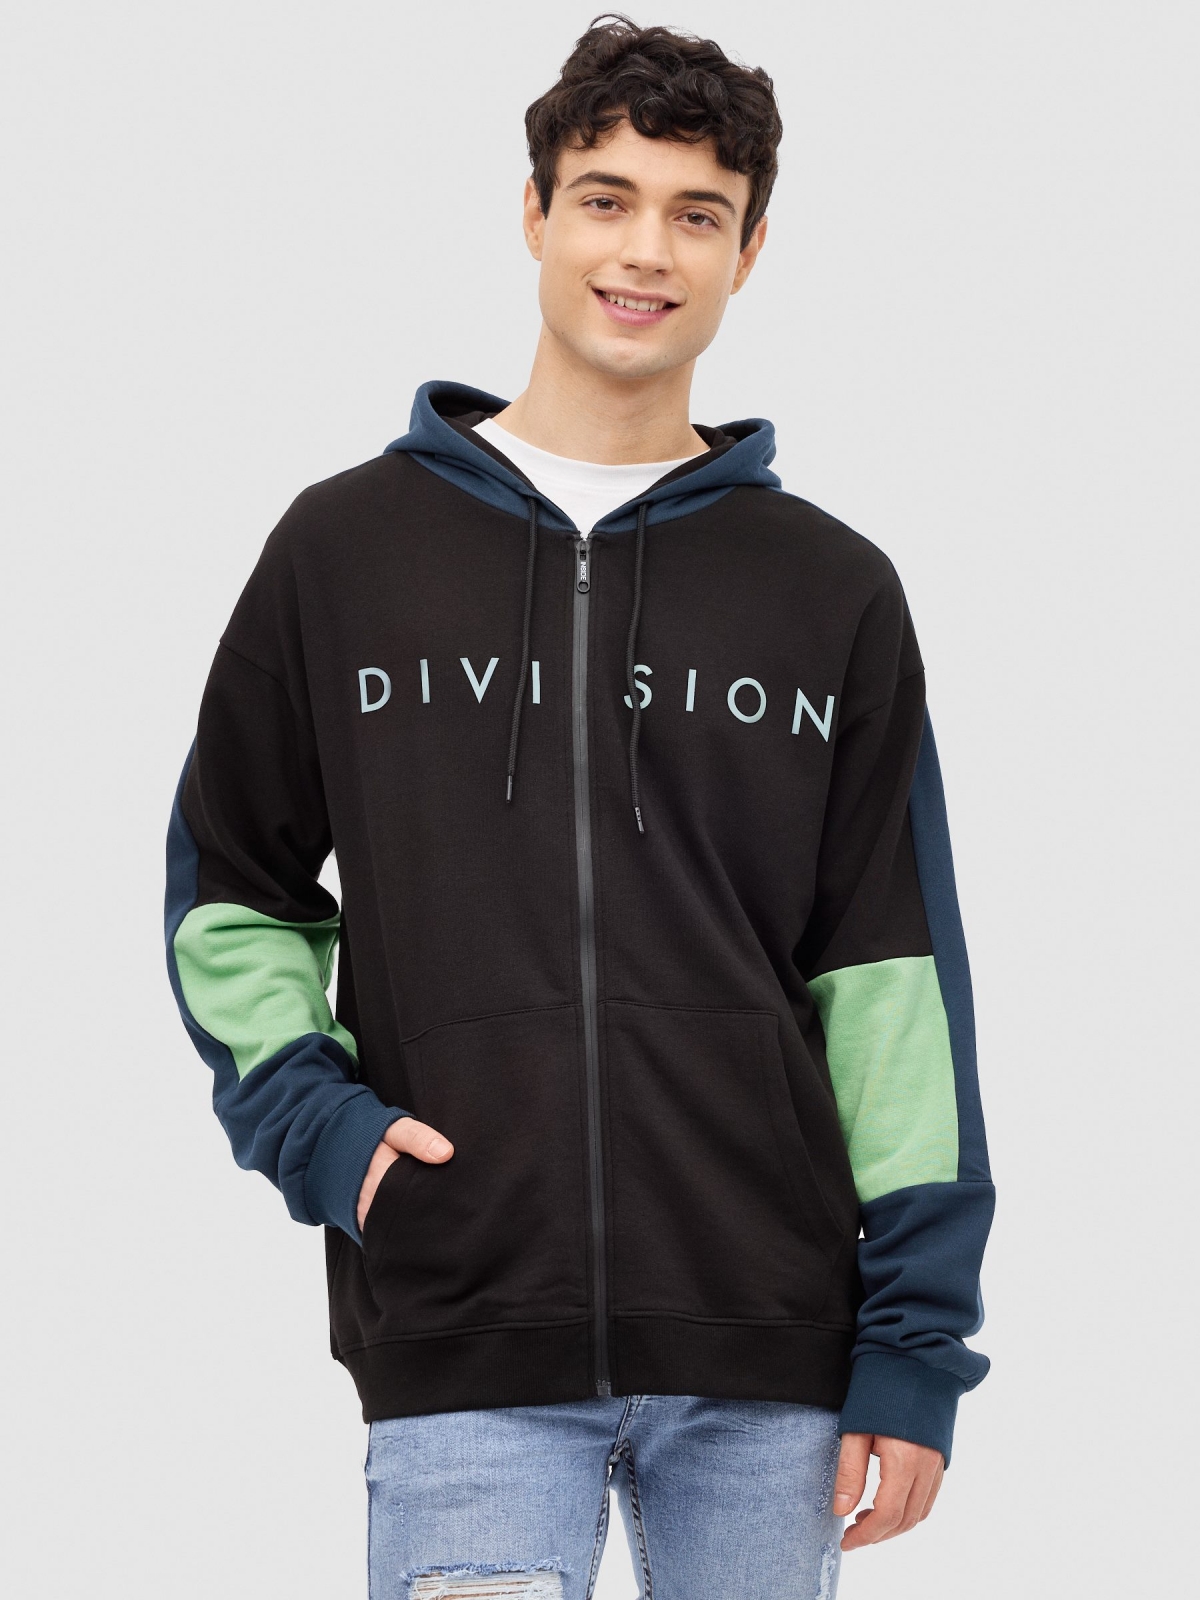 Division hooded sweatshirt black middle front view